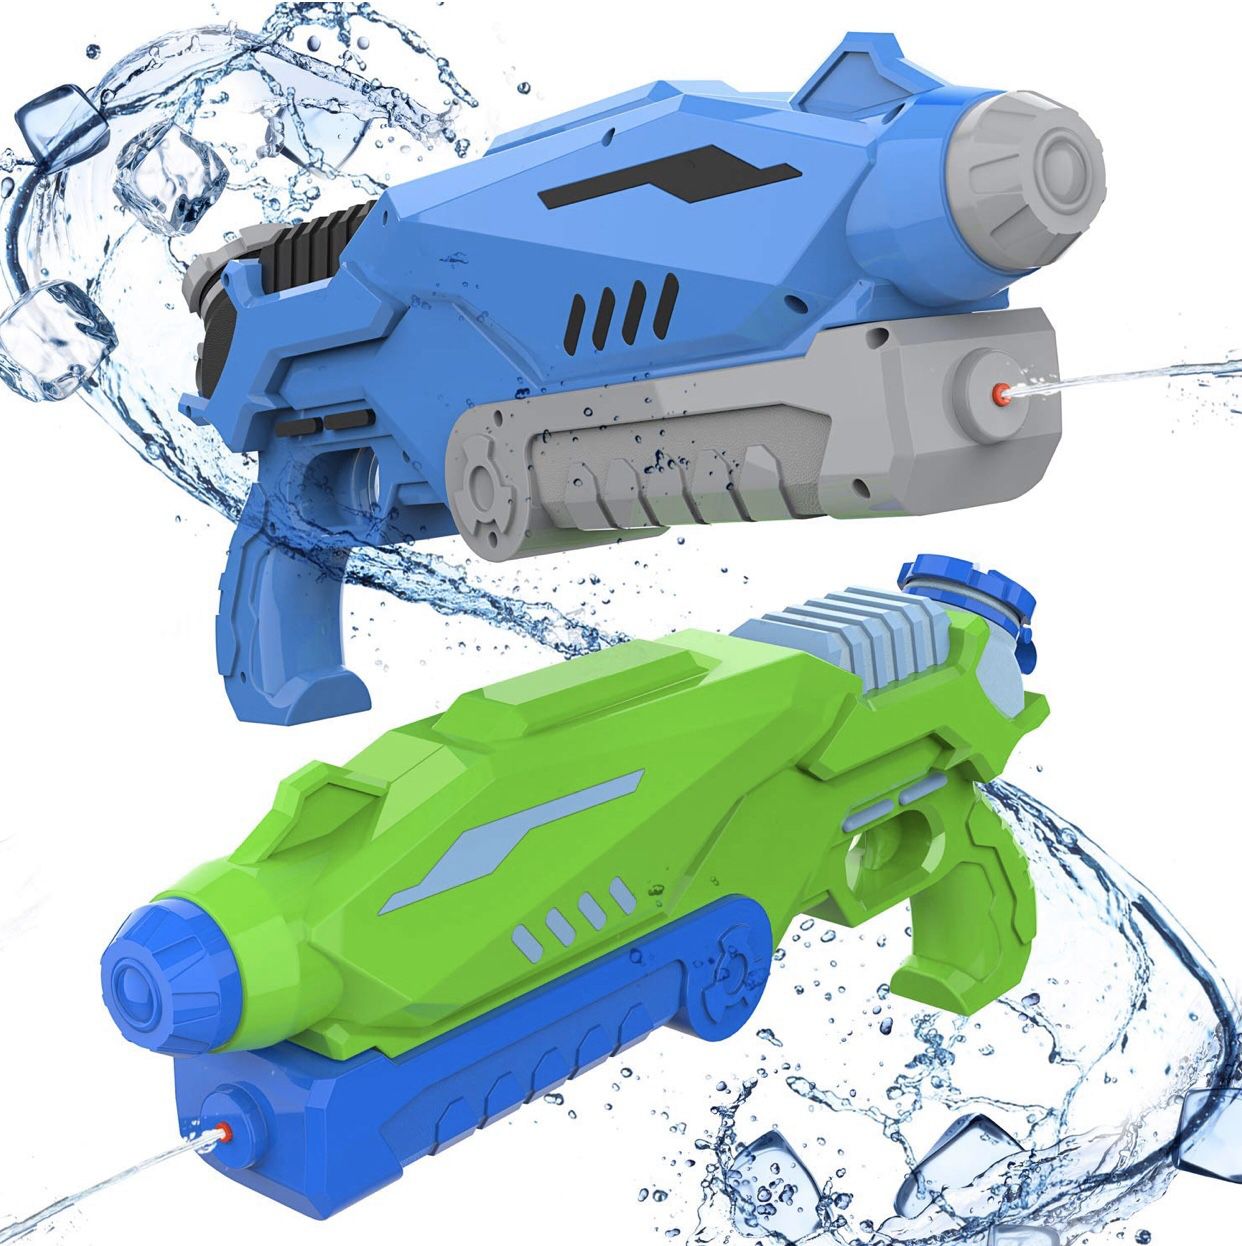 Water Gun Soakers, 800cc, 2 Pack Blaster Squirt Toys for Kids, Summer Swimming Pool Party, Beach, Outdoor - High Capacity, Long Range.